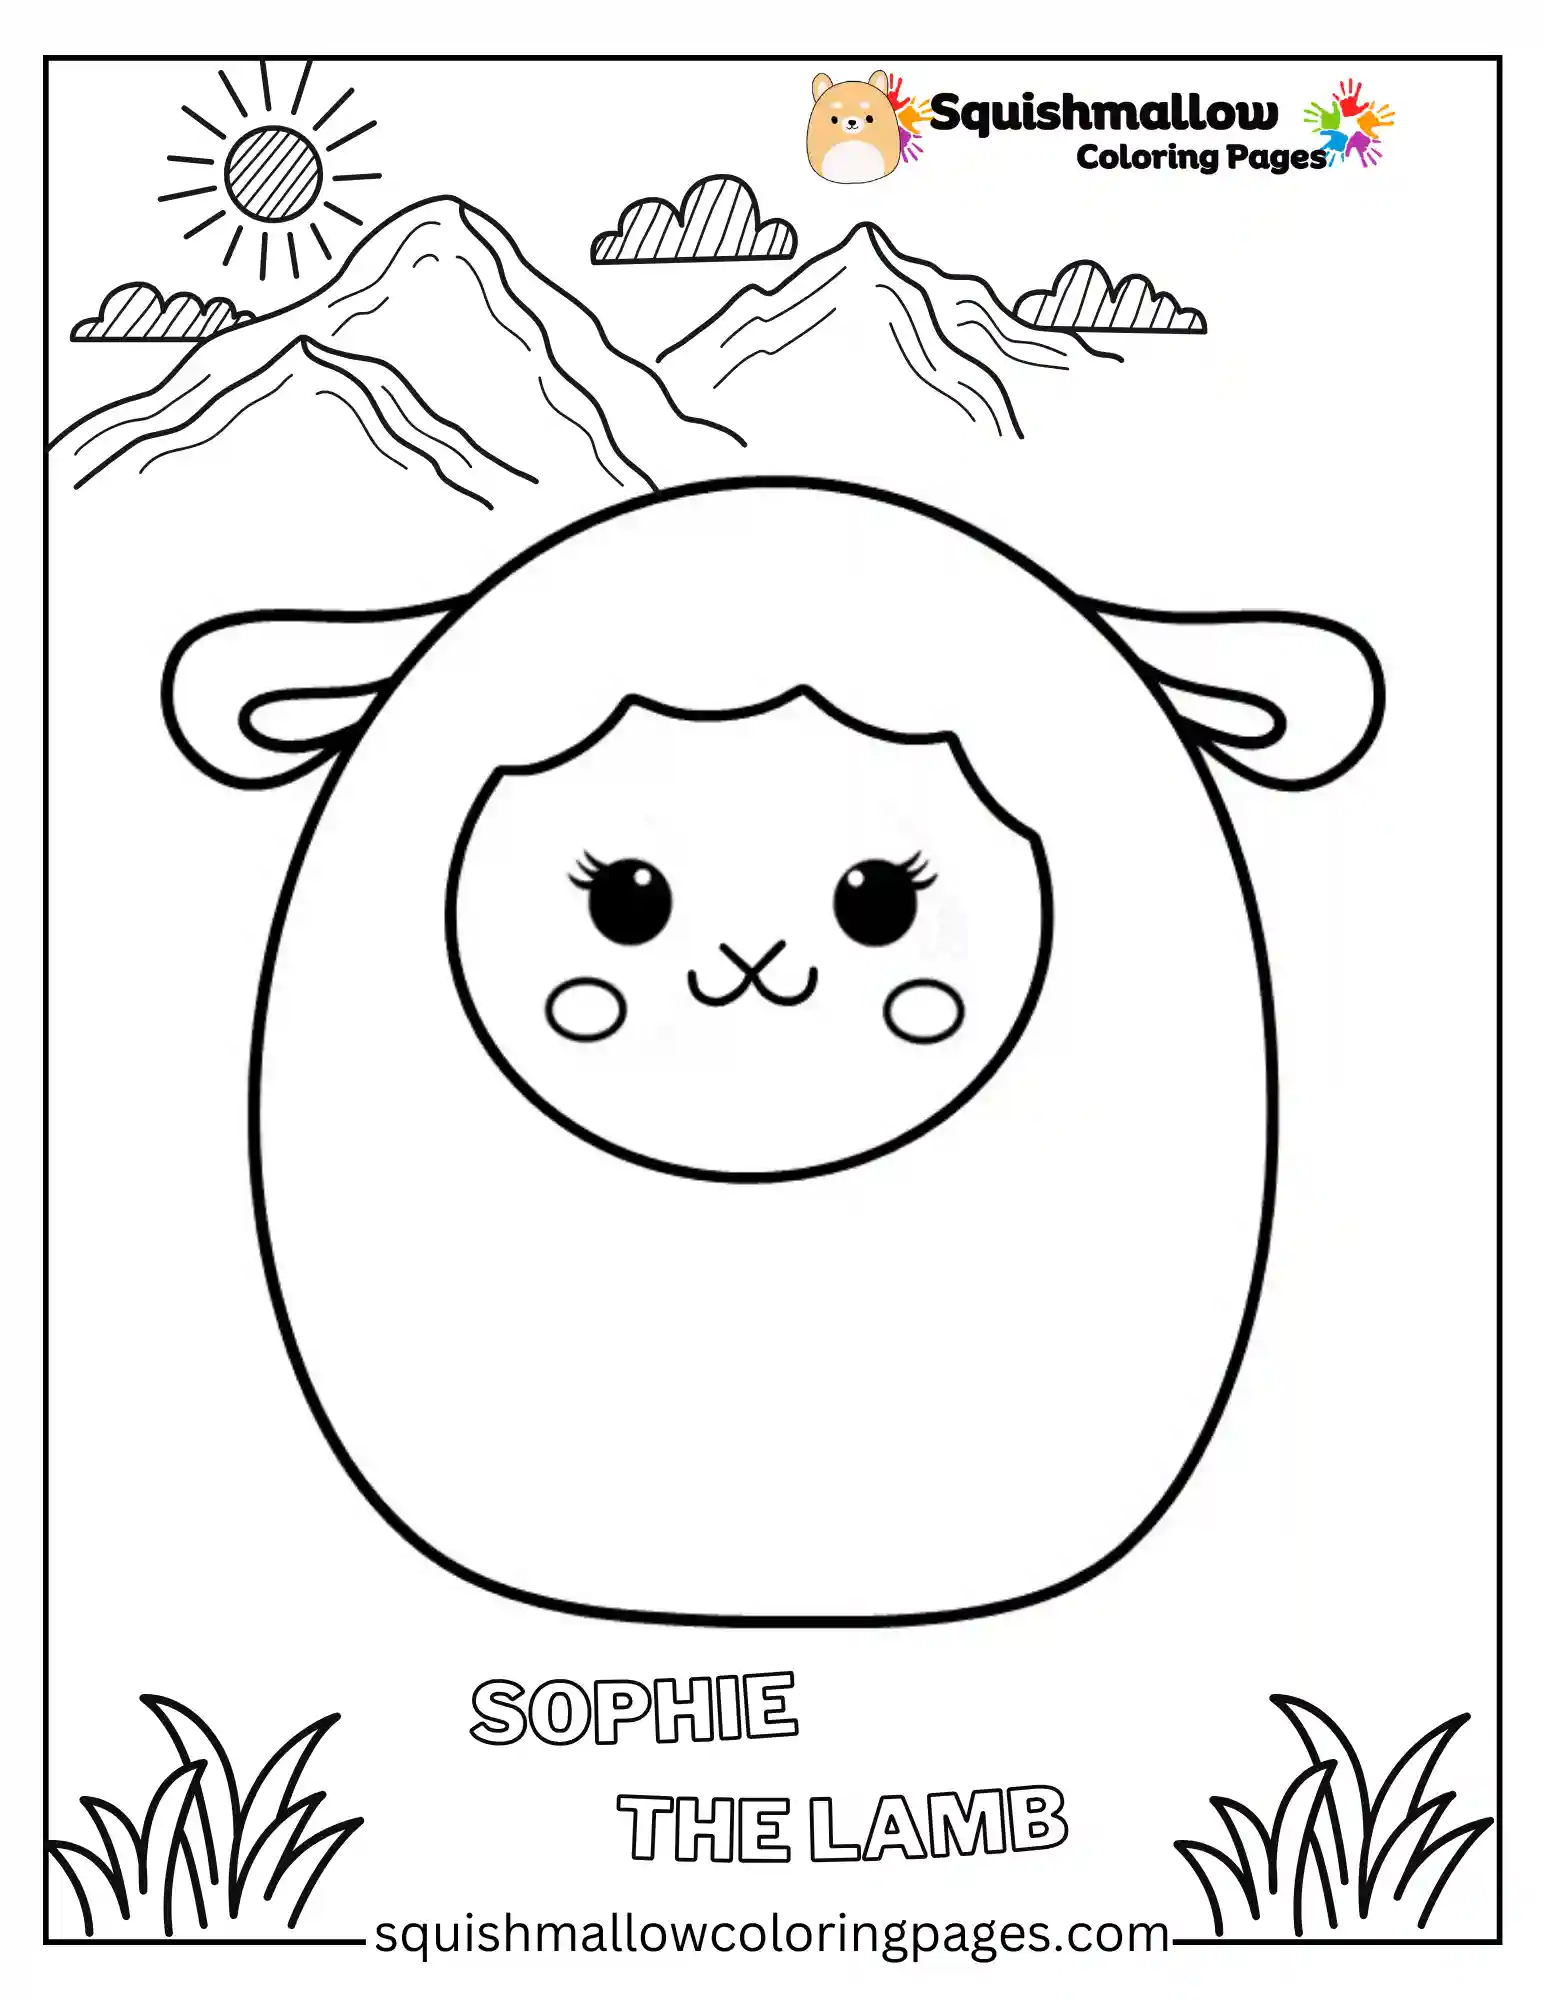 Sophie The Lamb Squishmallow Coloring Pages